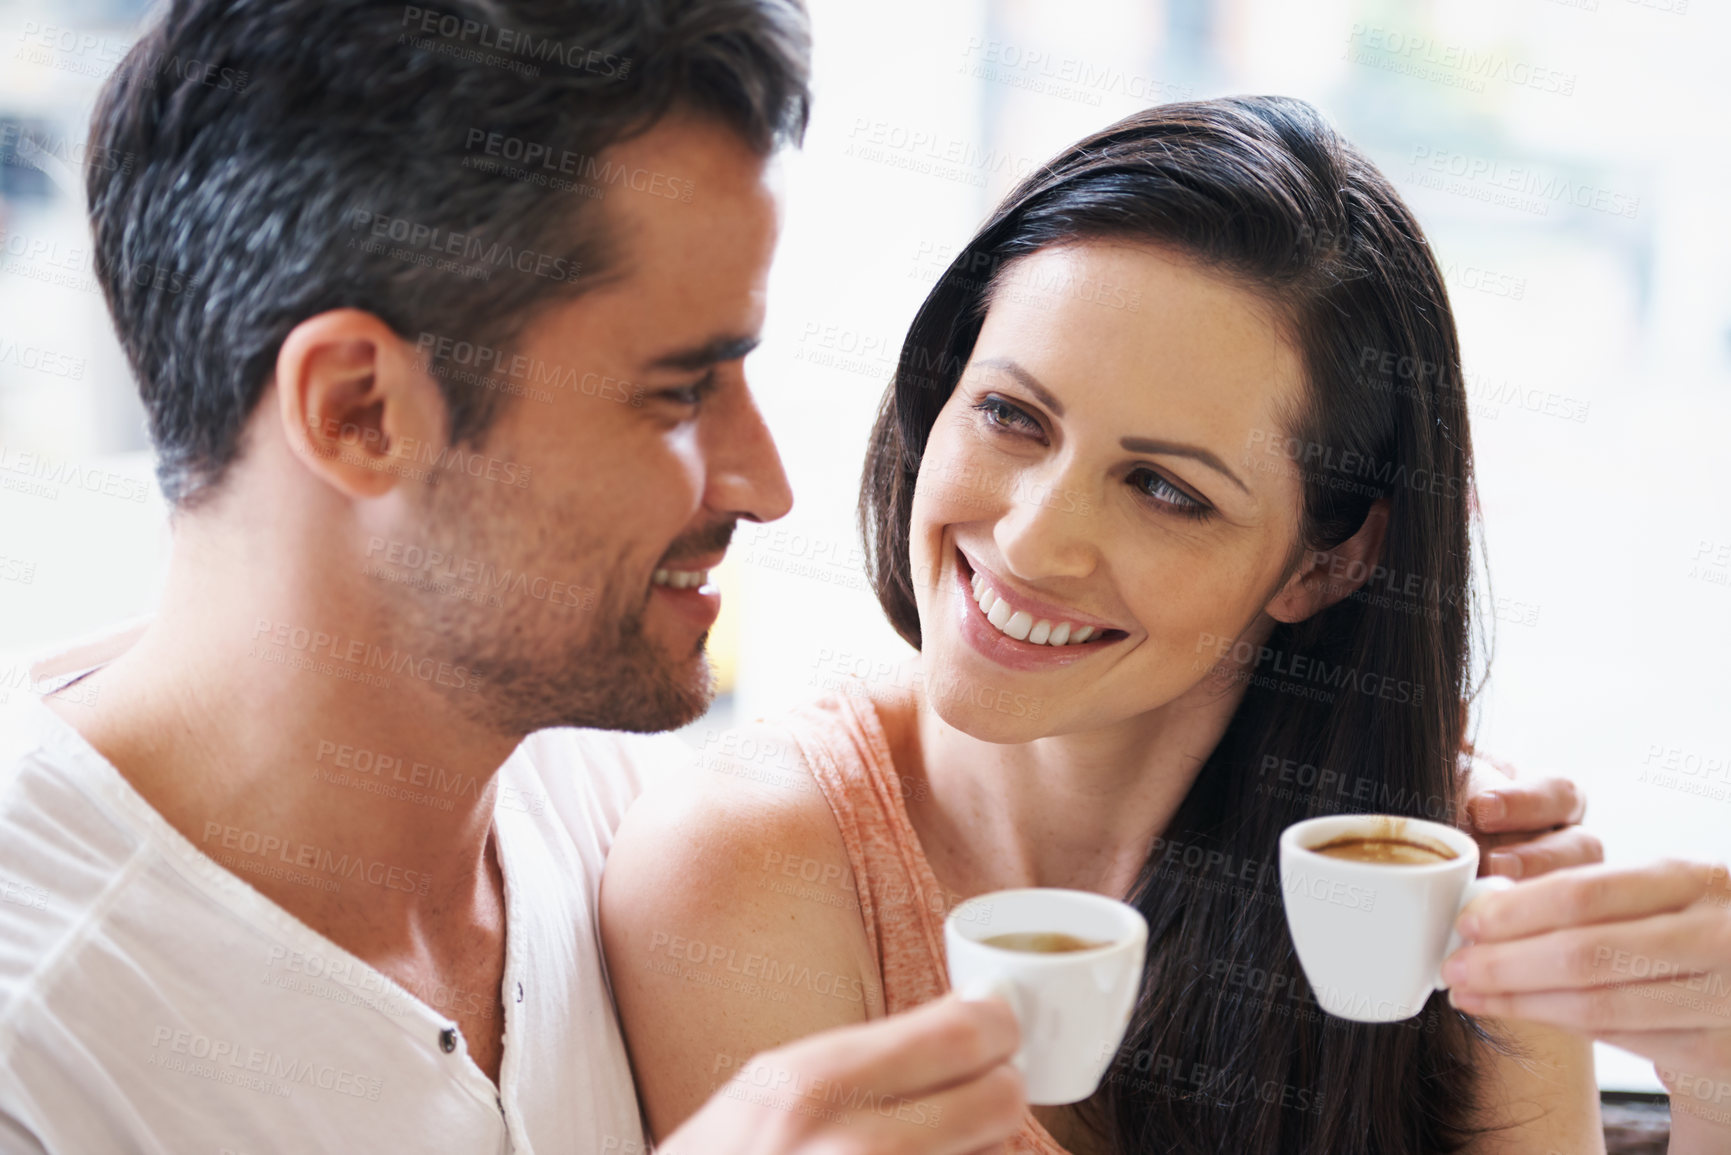 Buy stock photo Shot of a young couple grabbing a cup of coffee together